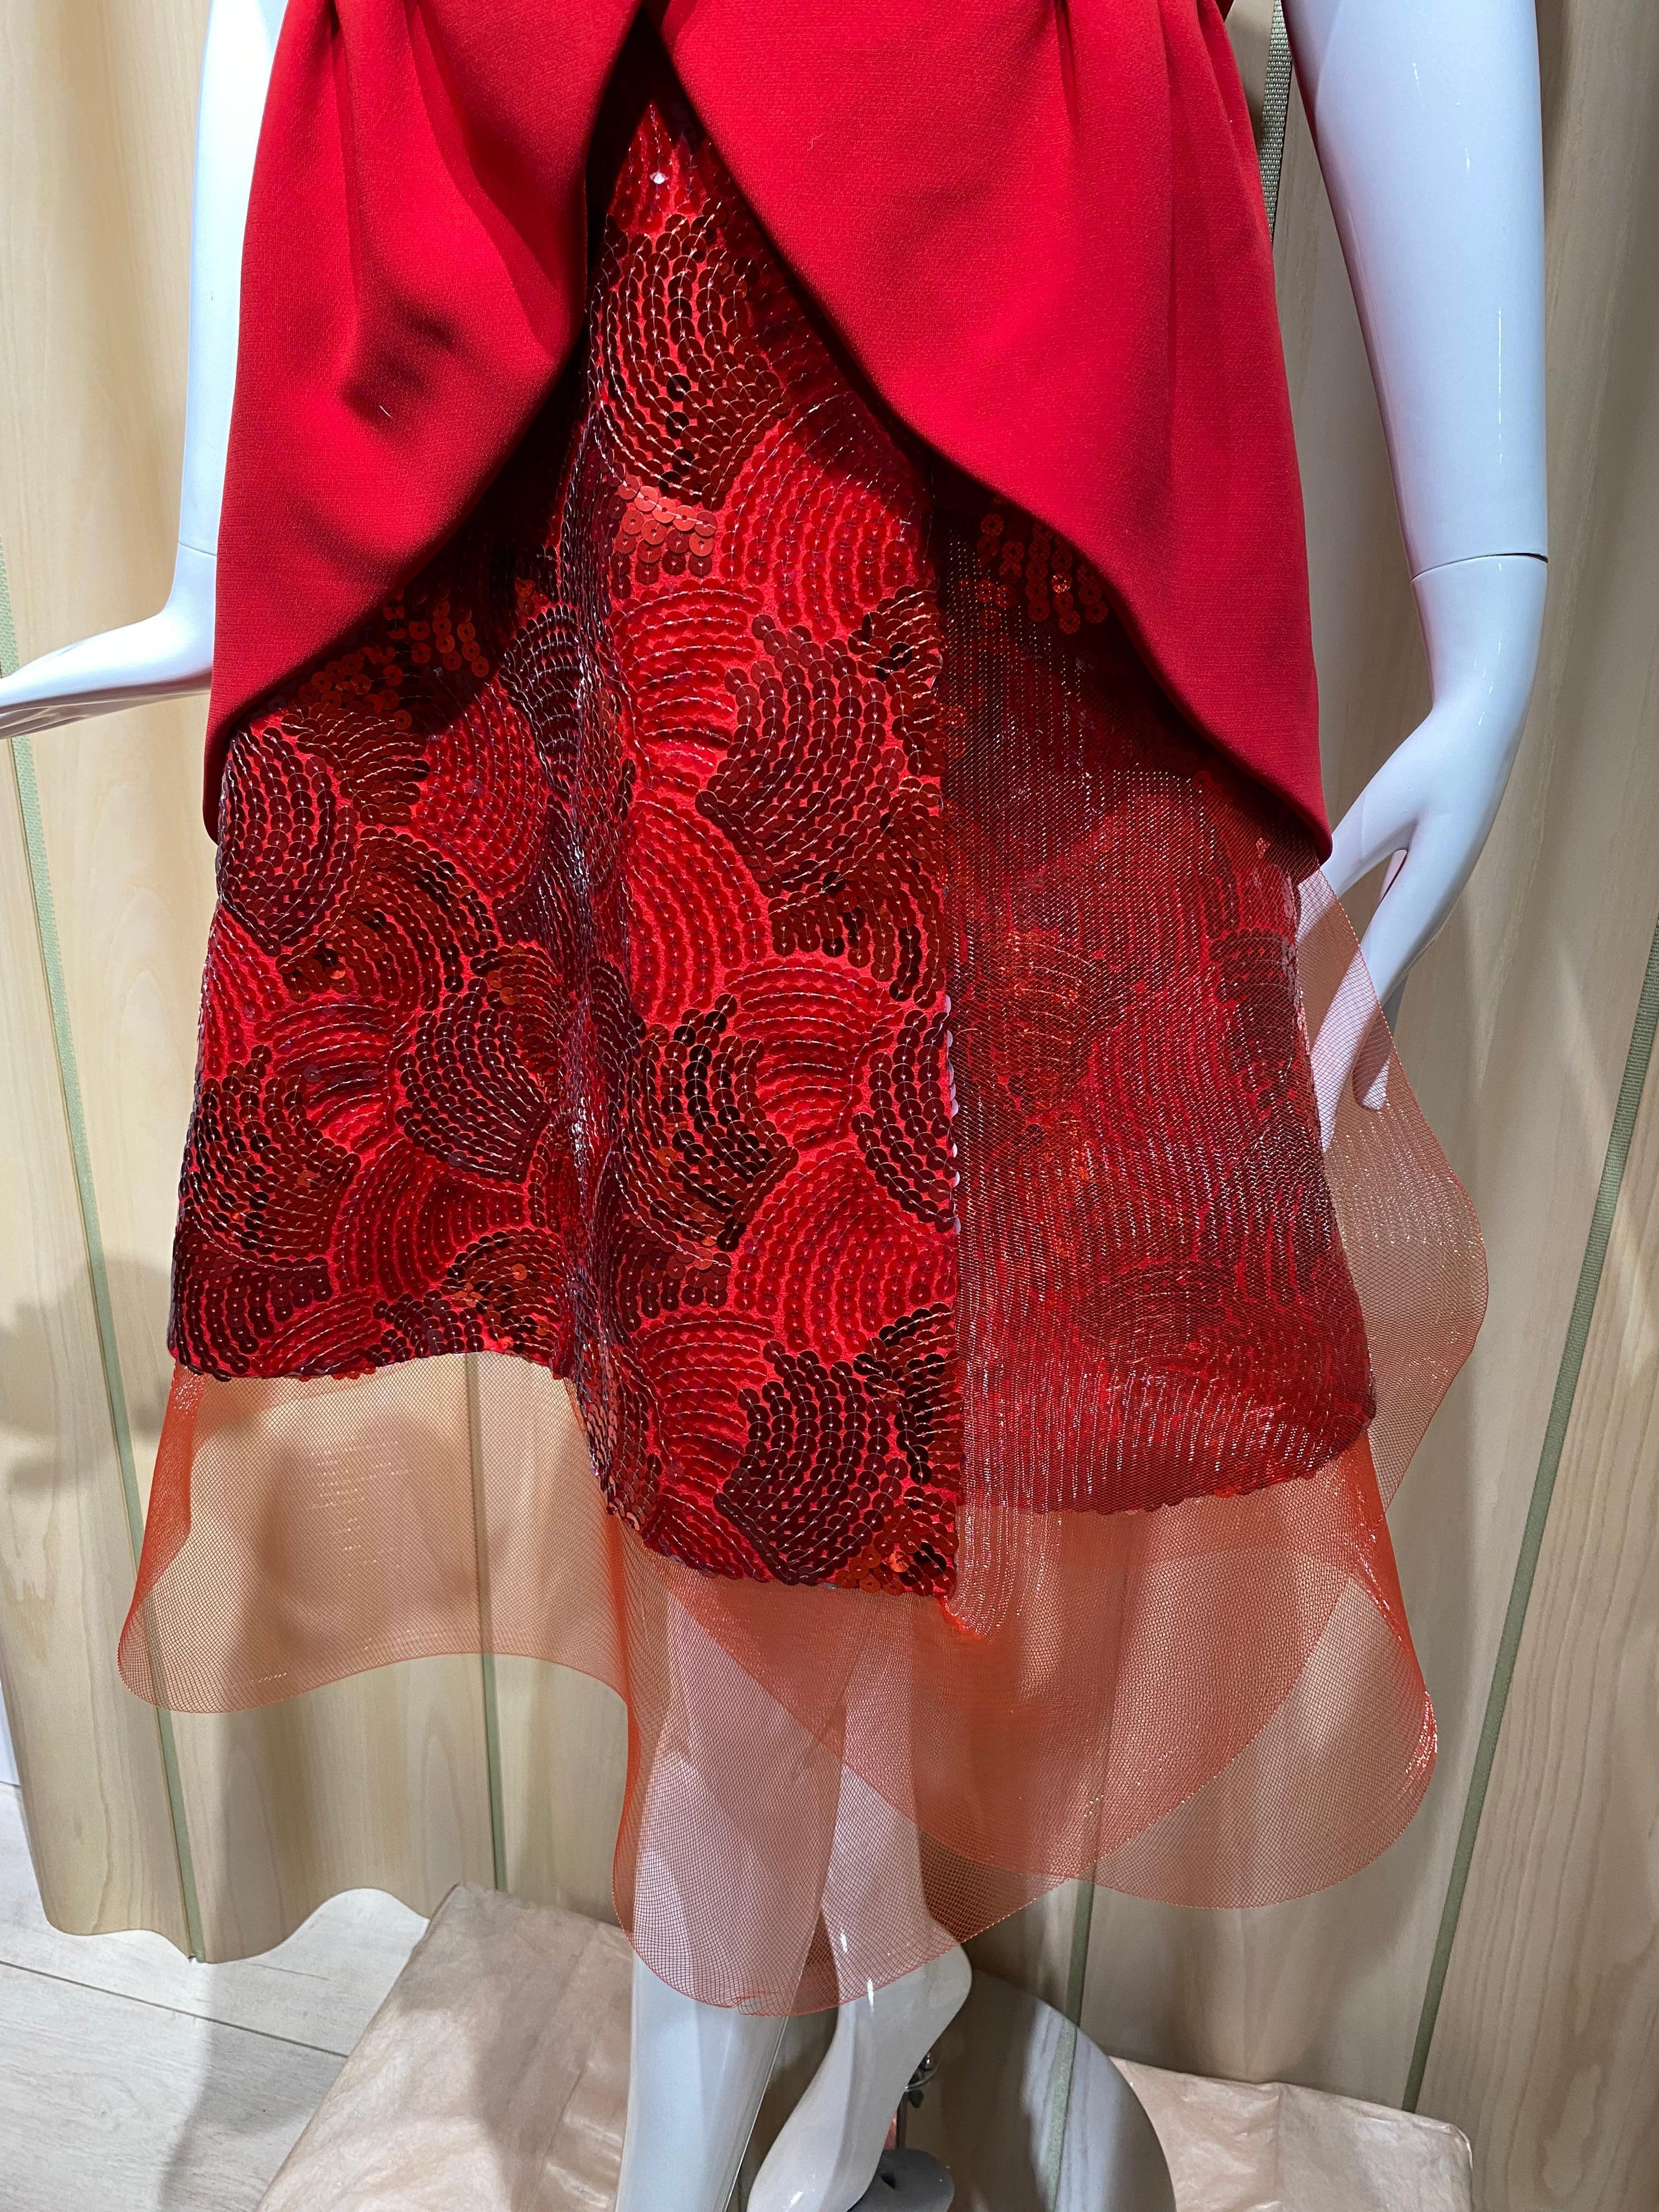 Rodarte 2011 Runway Red Top and Skirt Set For Sale 13